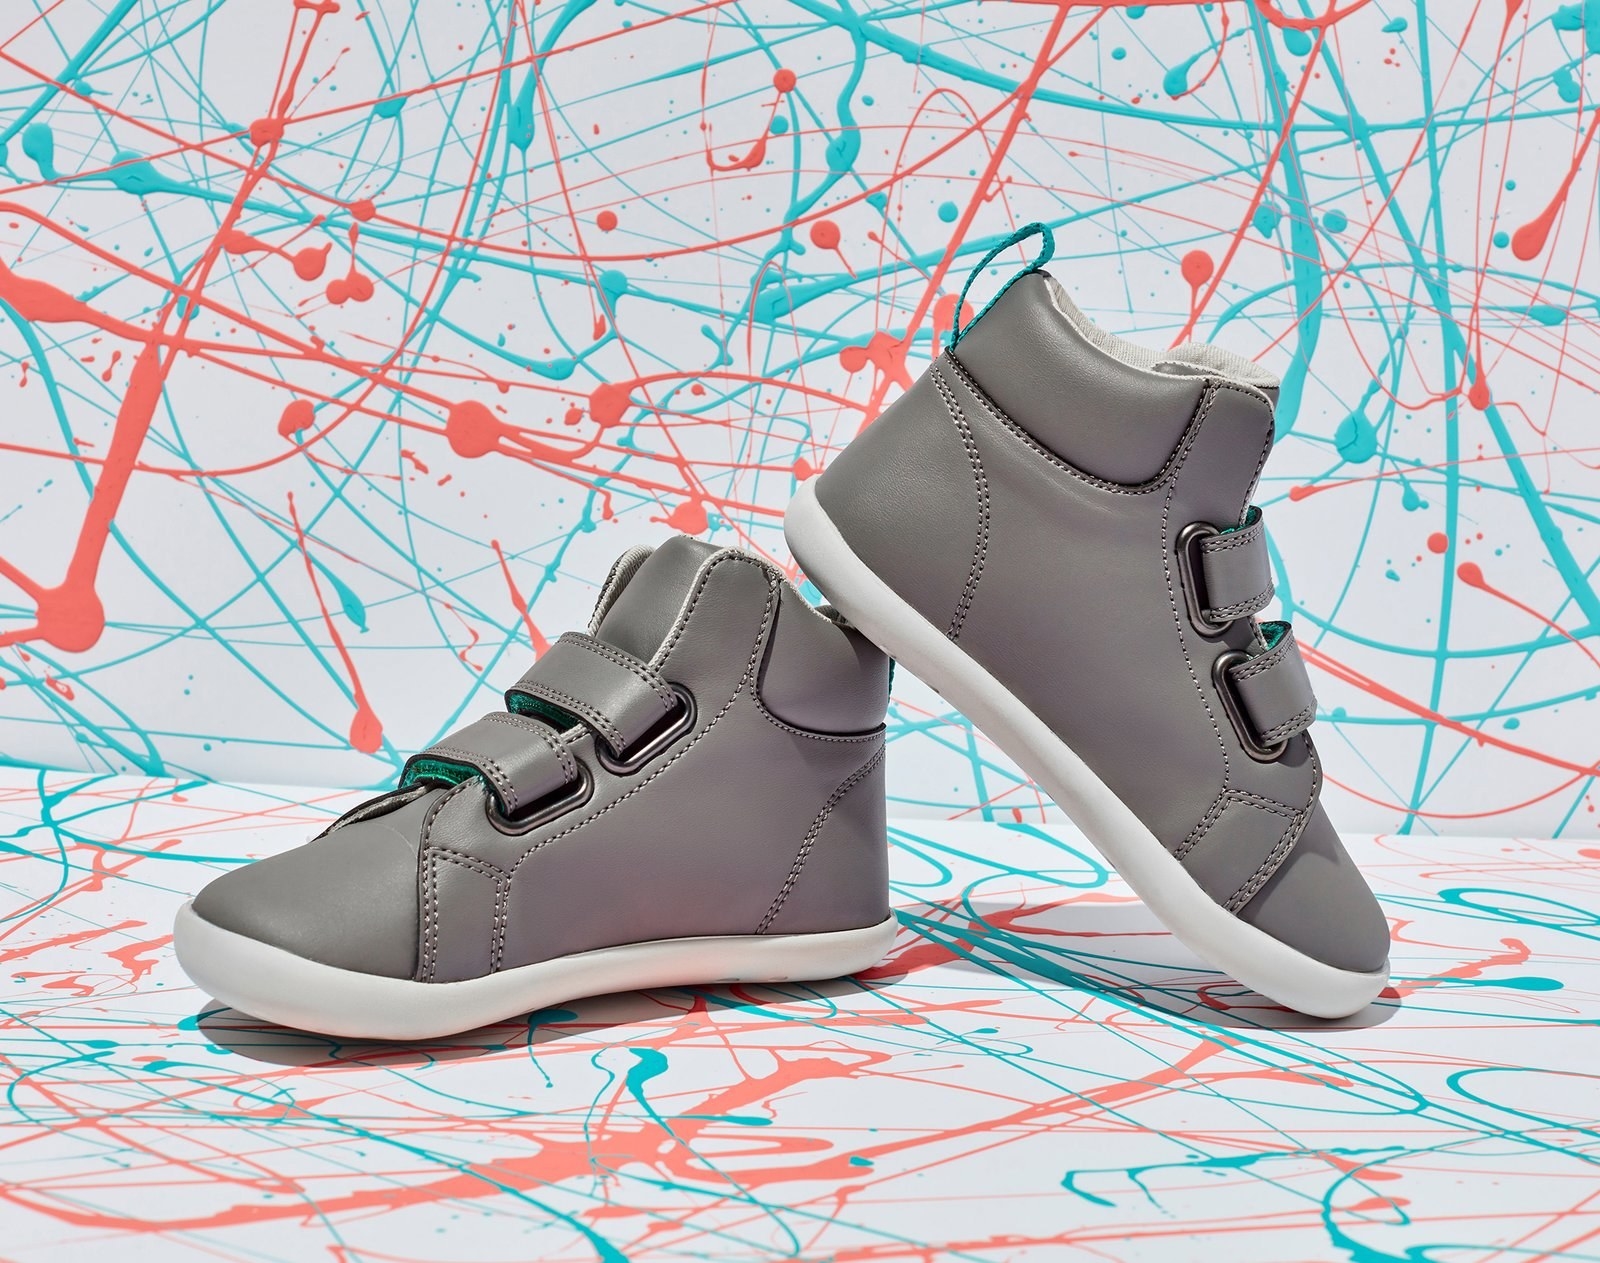 Baby high top sneakers with velro straps in gray with white trim